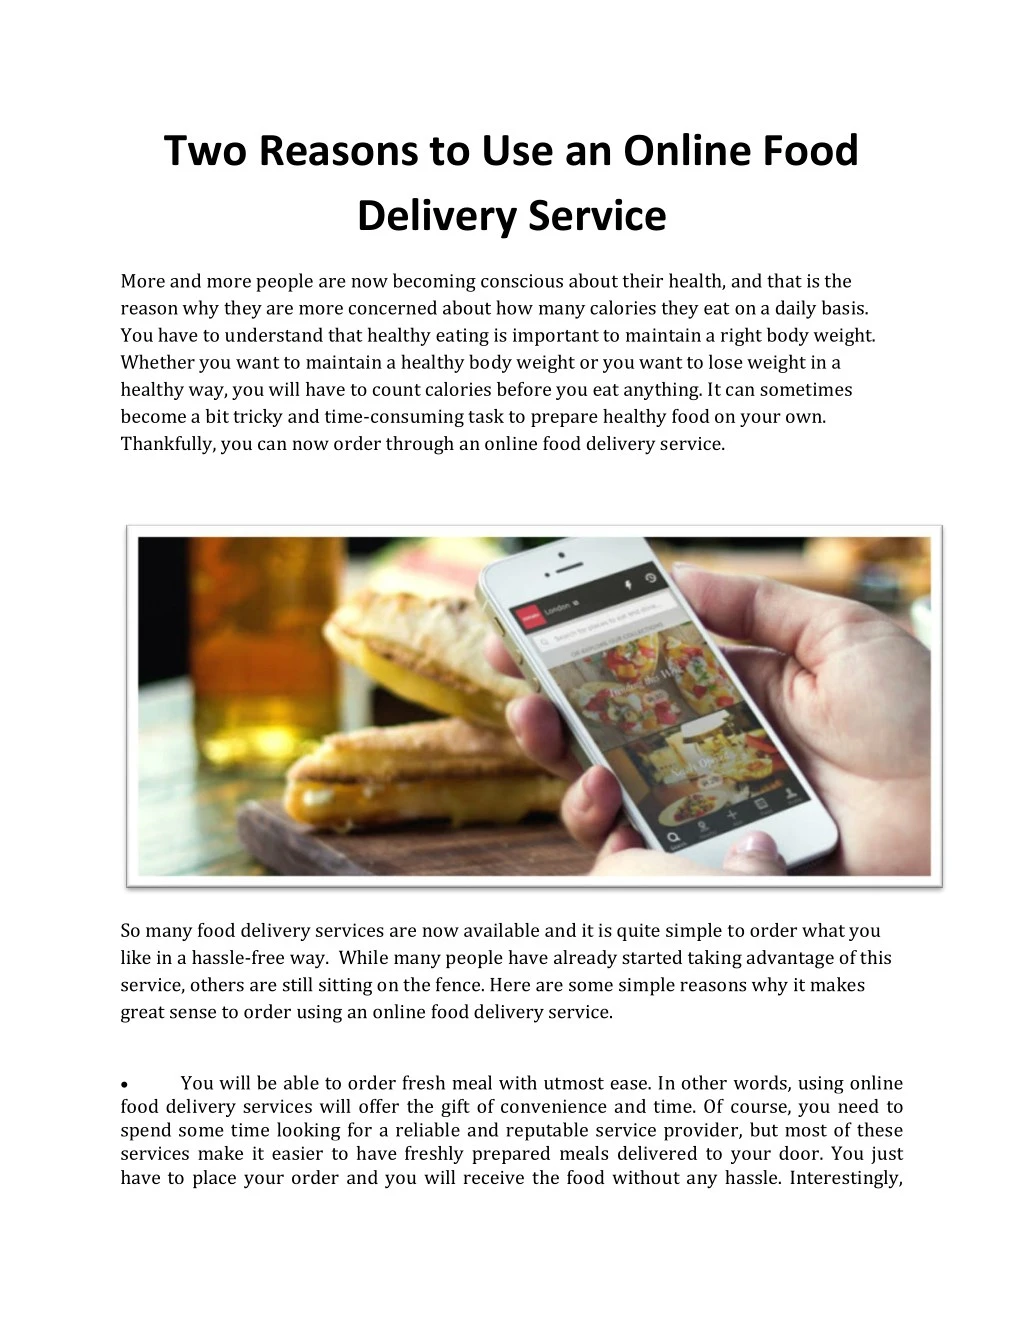 two reasons to use an online food delivery service